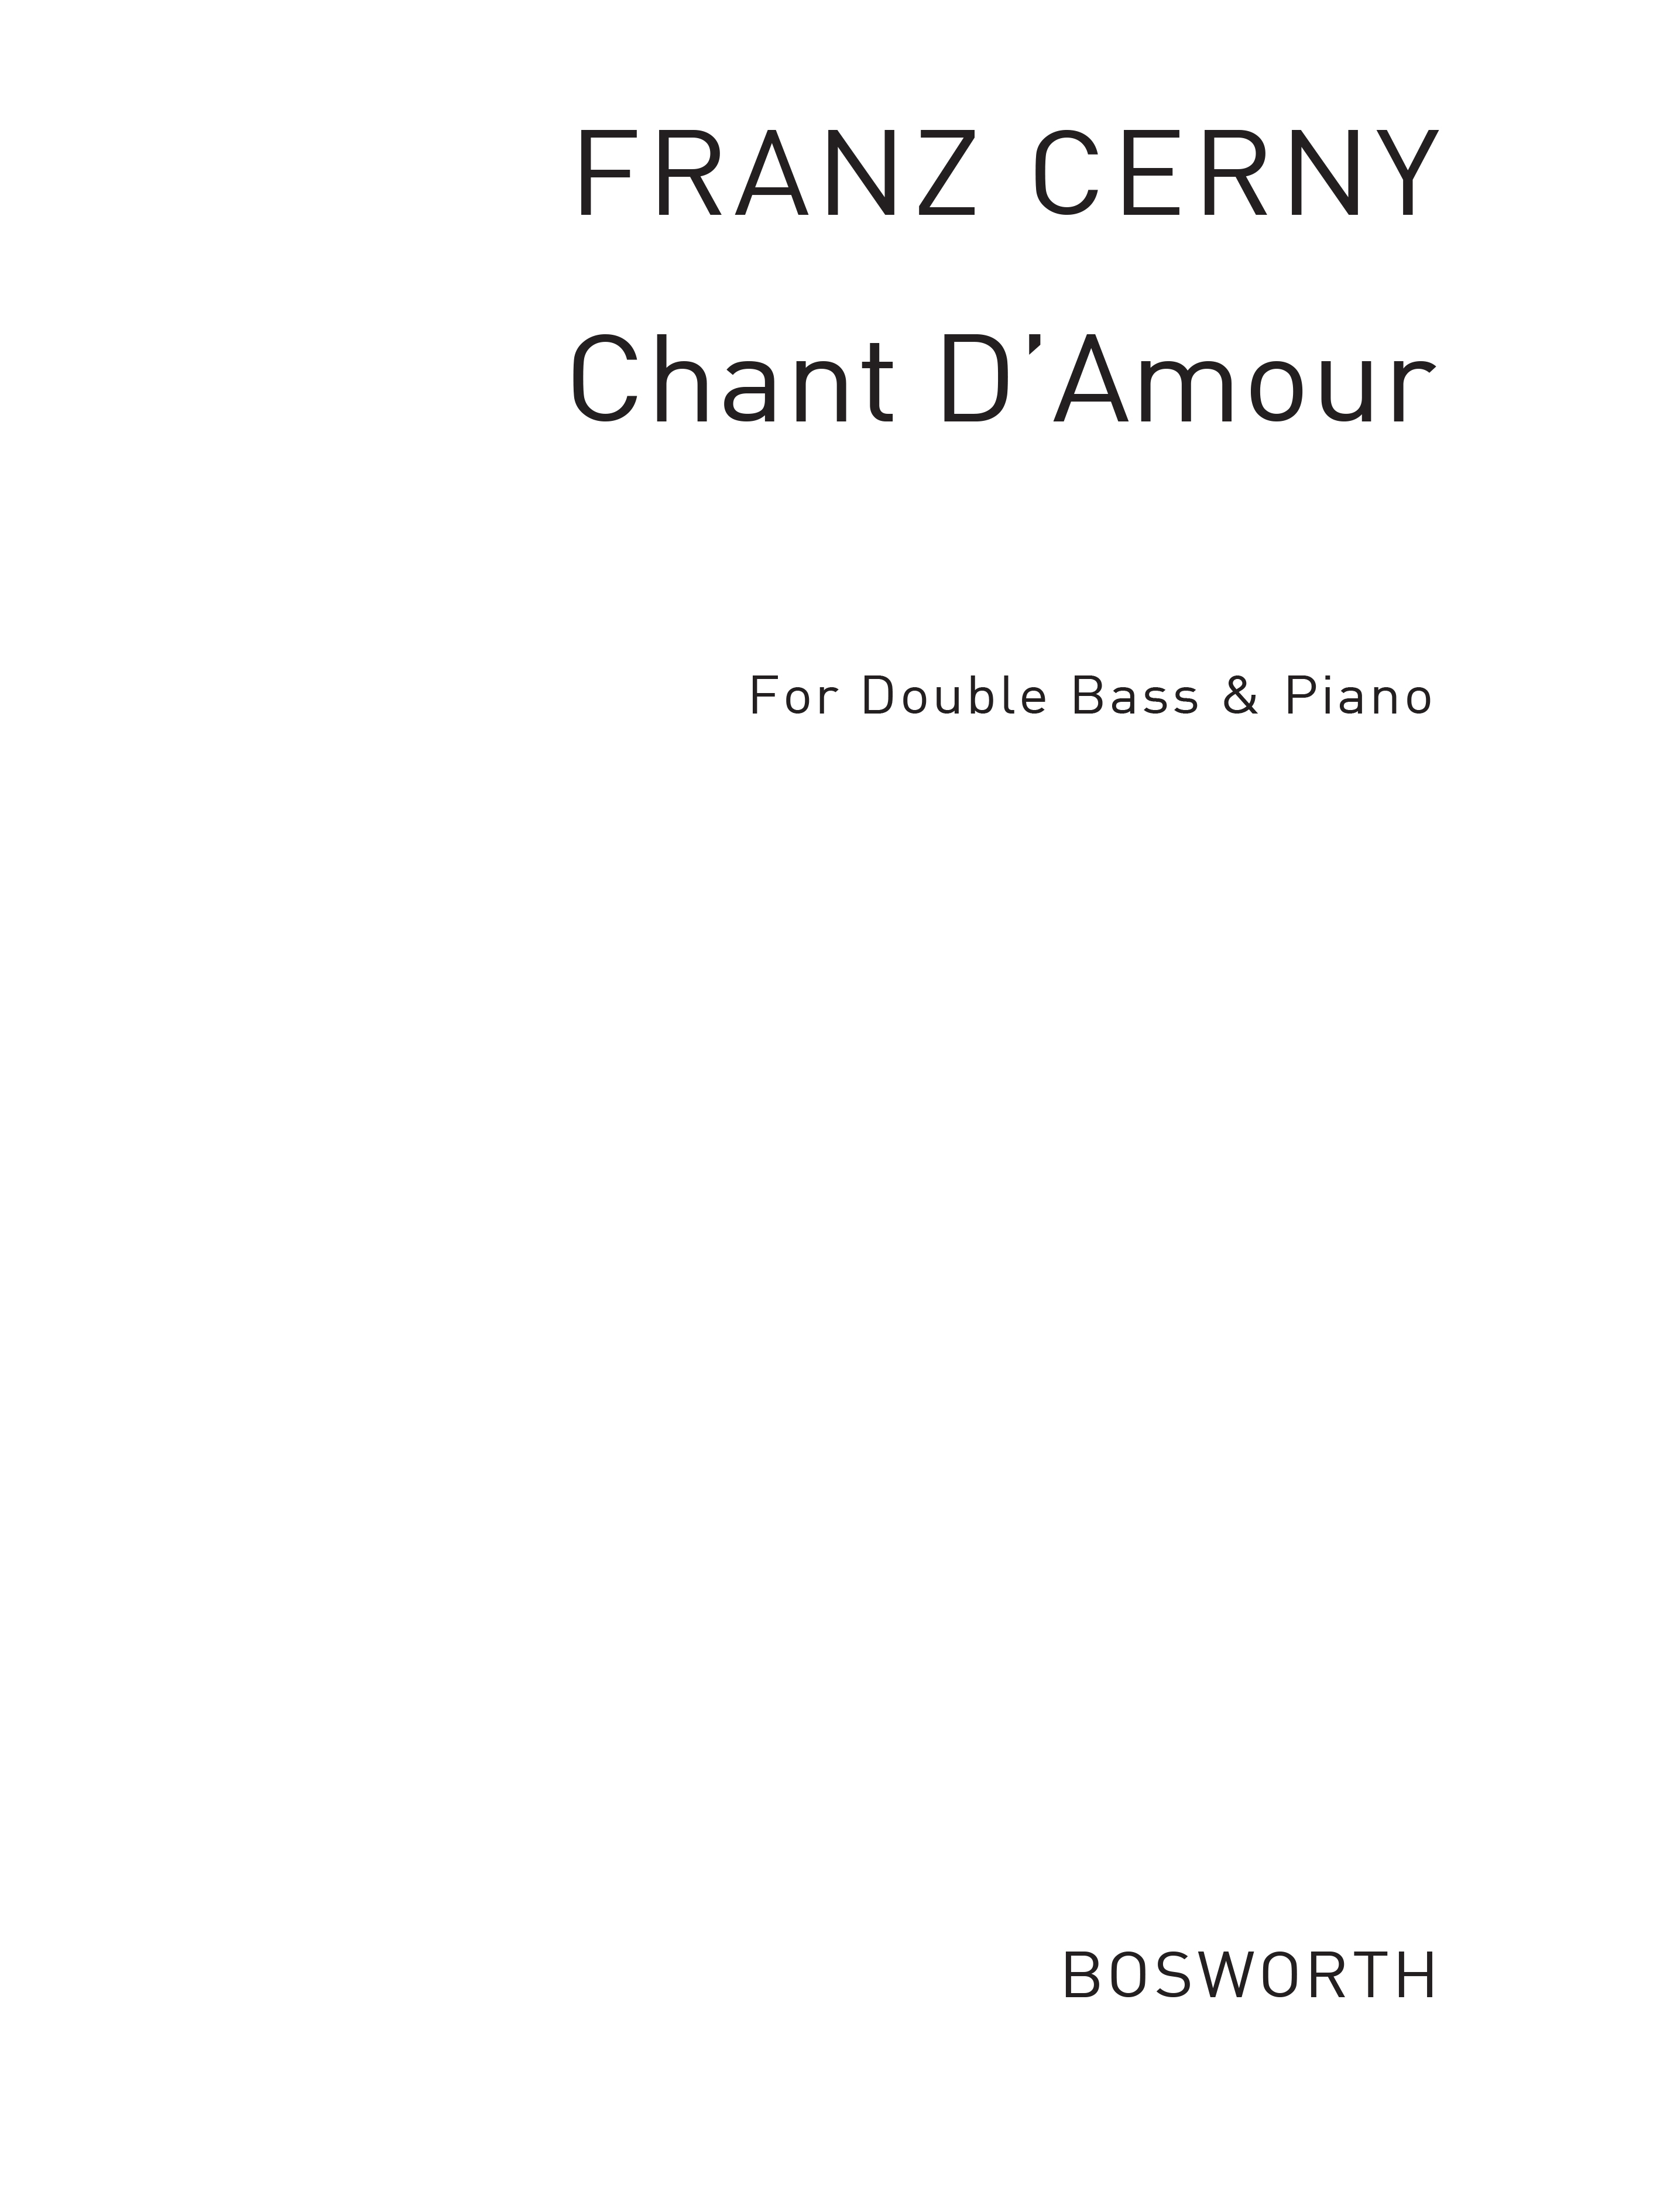 F Cerny: Chant D'amour